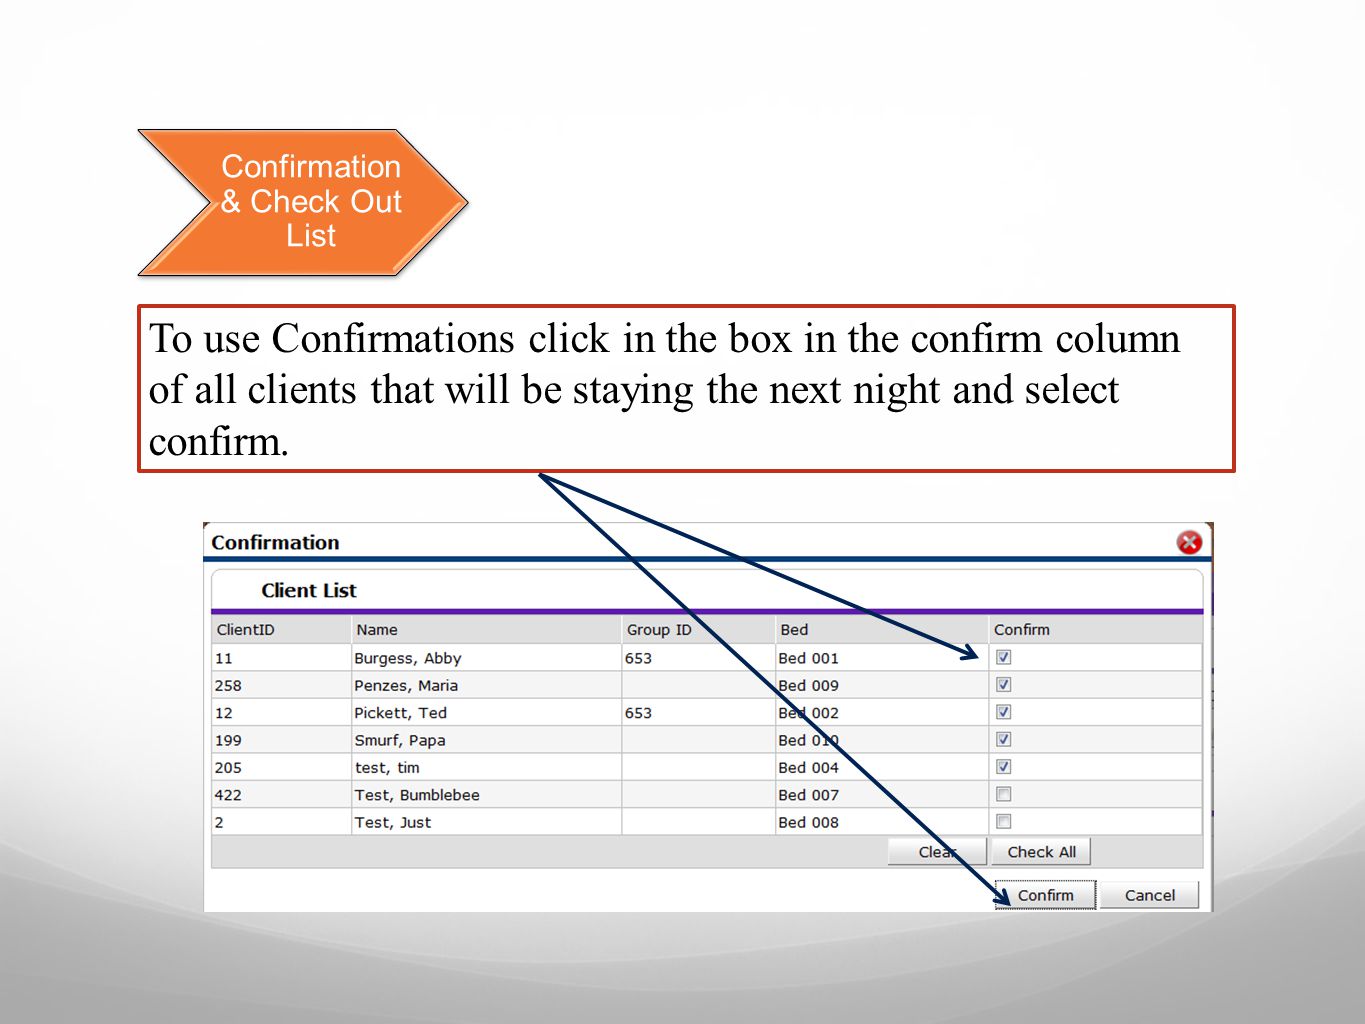 Confirmation & Check Out List To use Confirmations click in the box in the confirm column of all clients that will be staying the next night and select confirm.